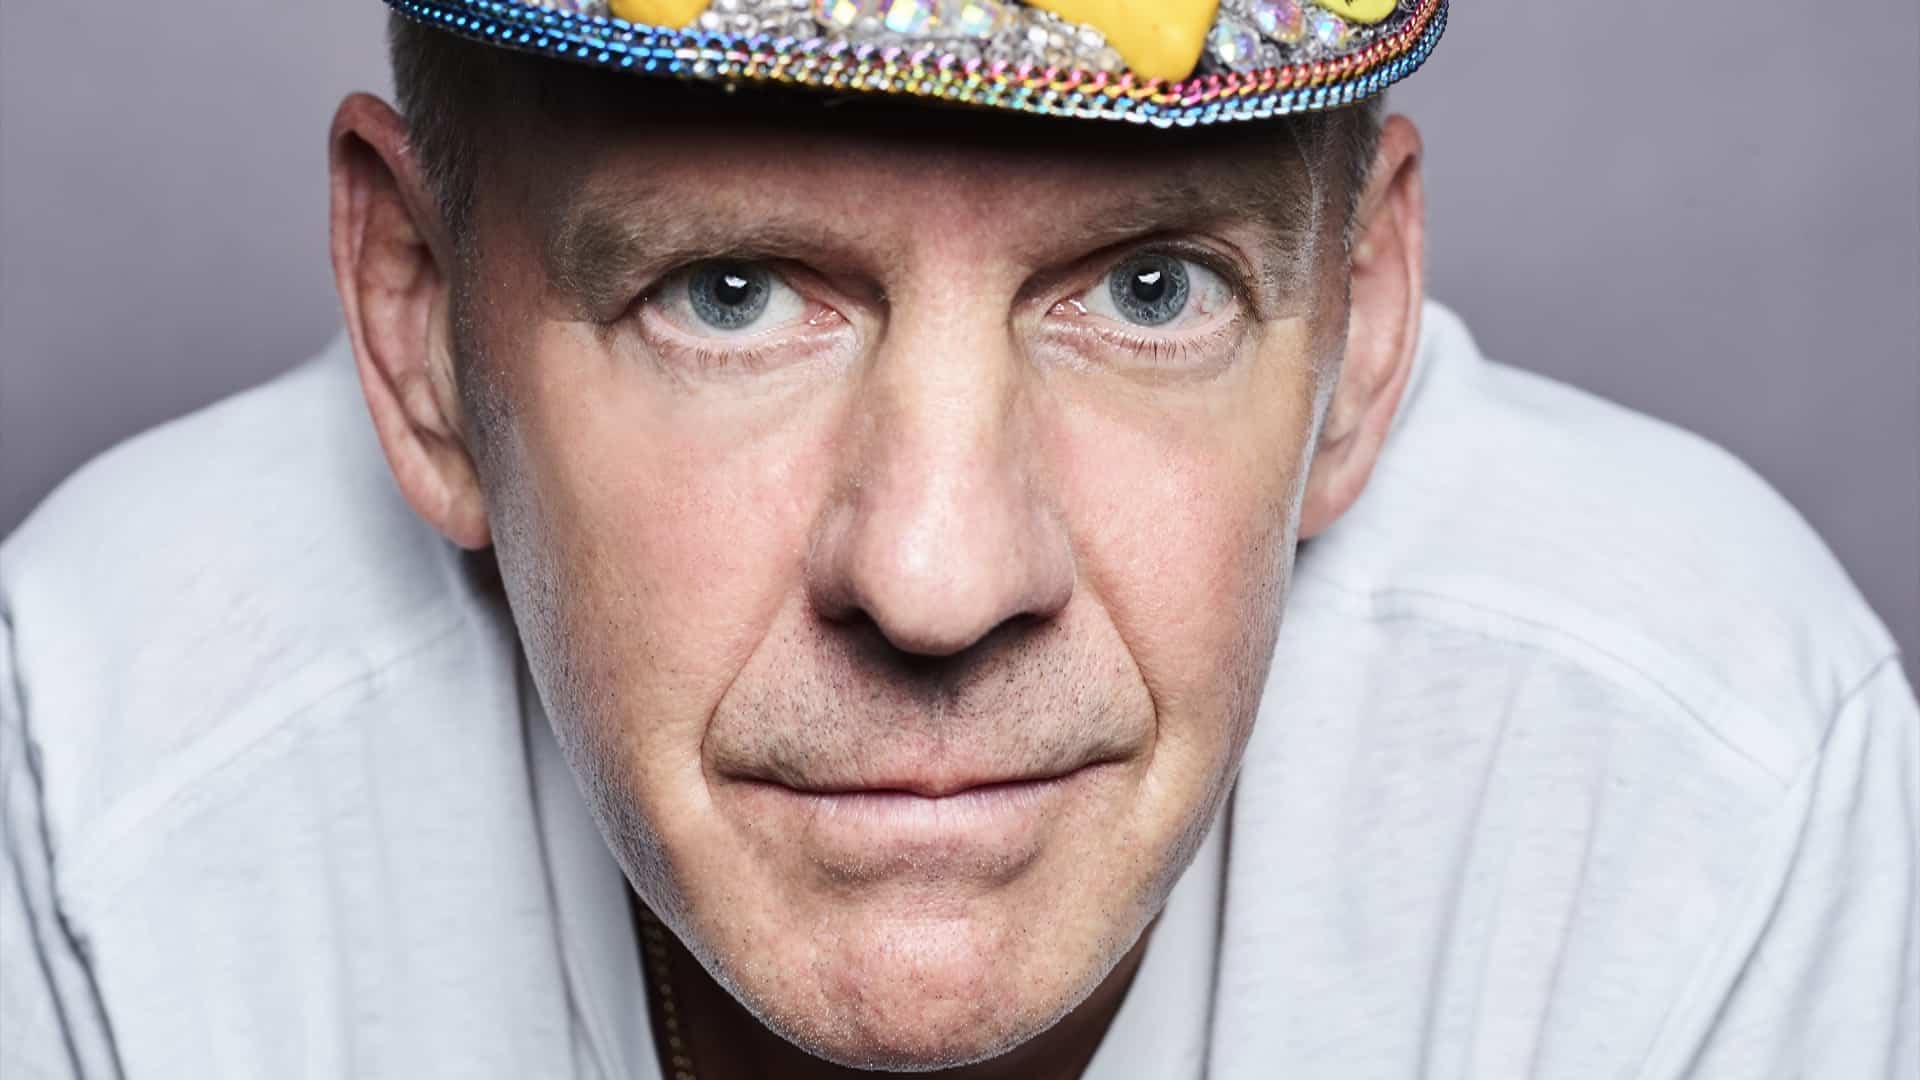 Fatboy Slim talks the 90's scene, UK crowds & more at Creamfields [Exclusive Interview]